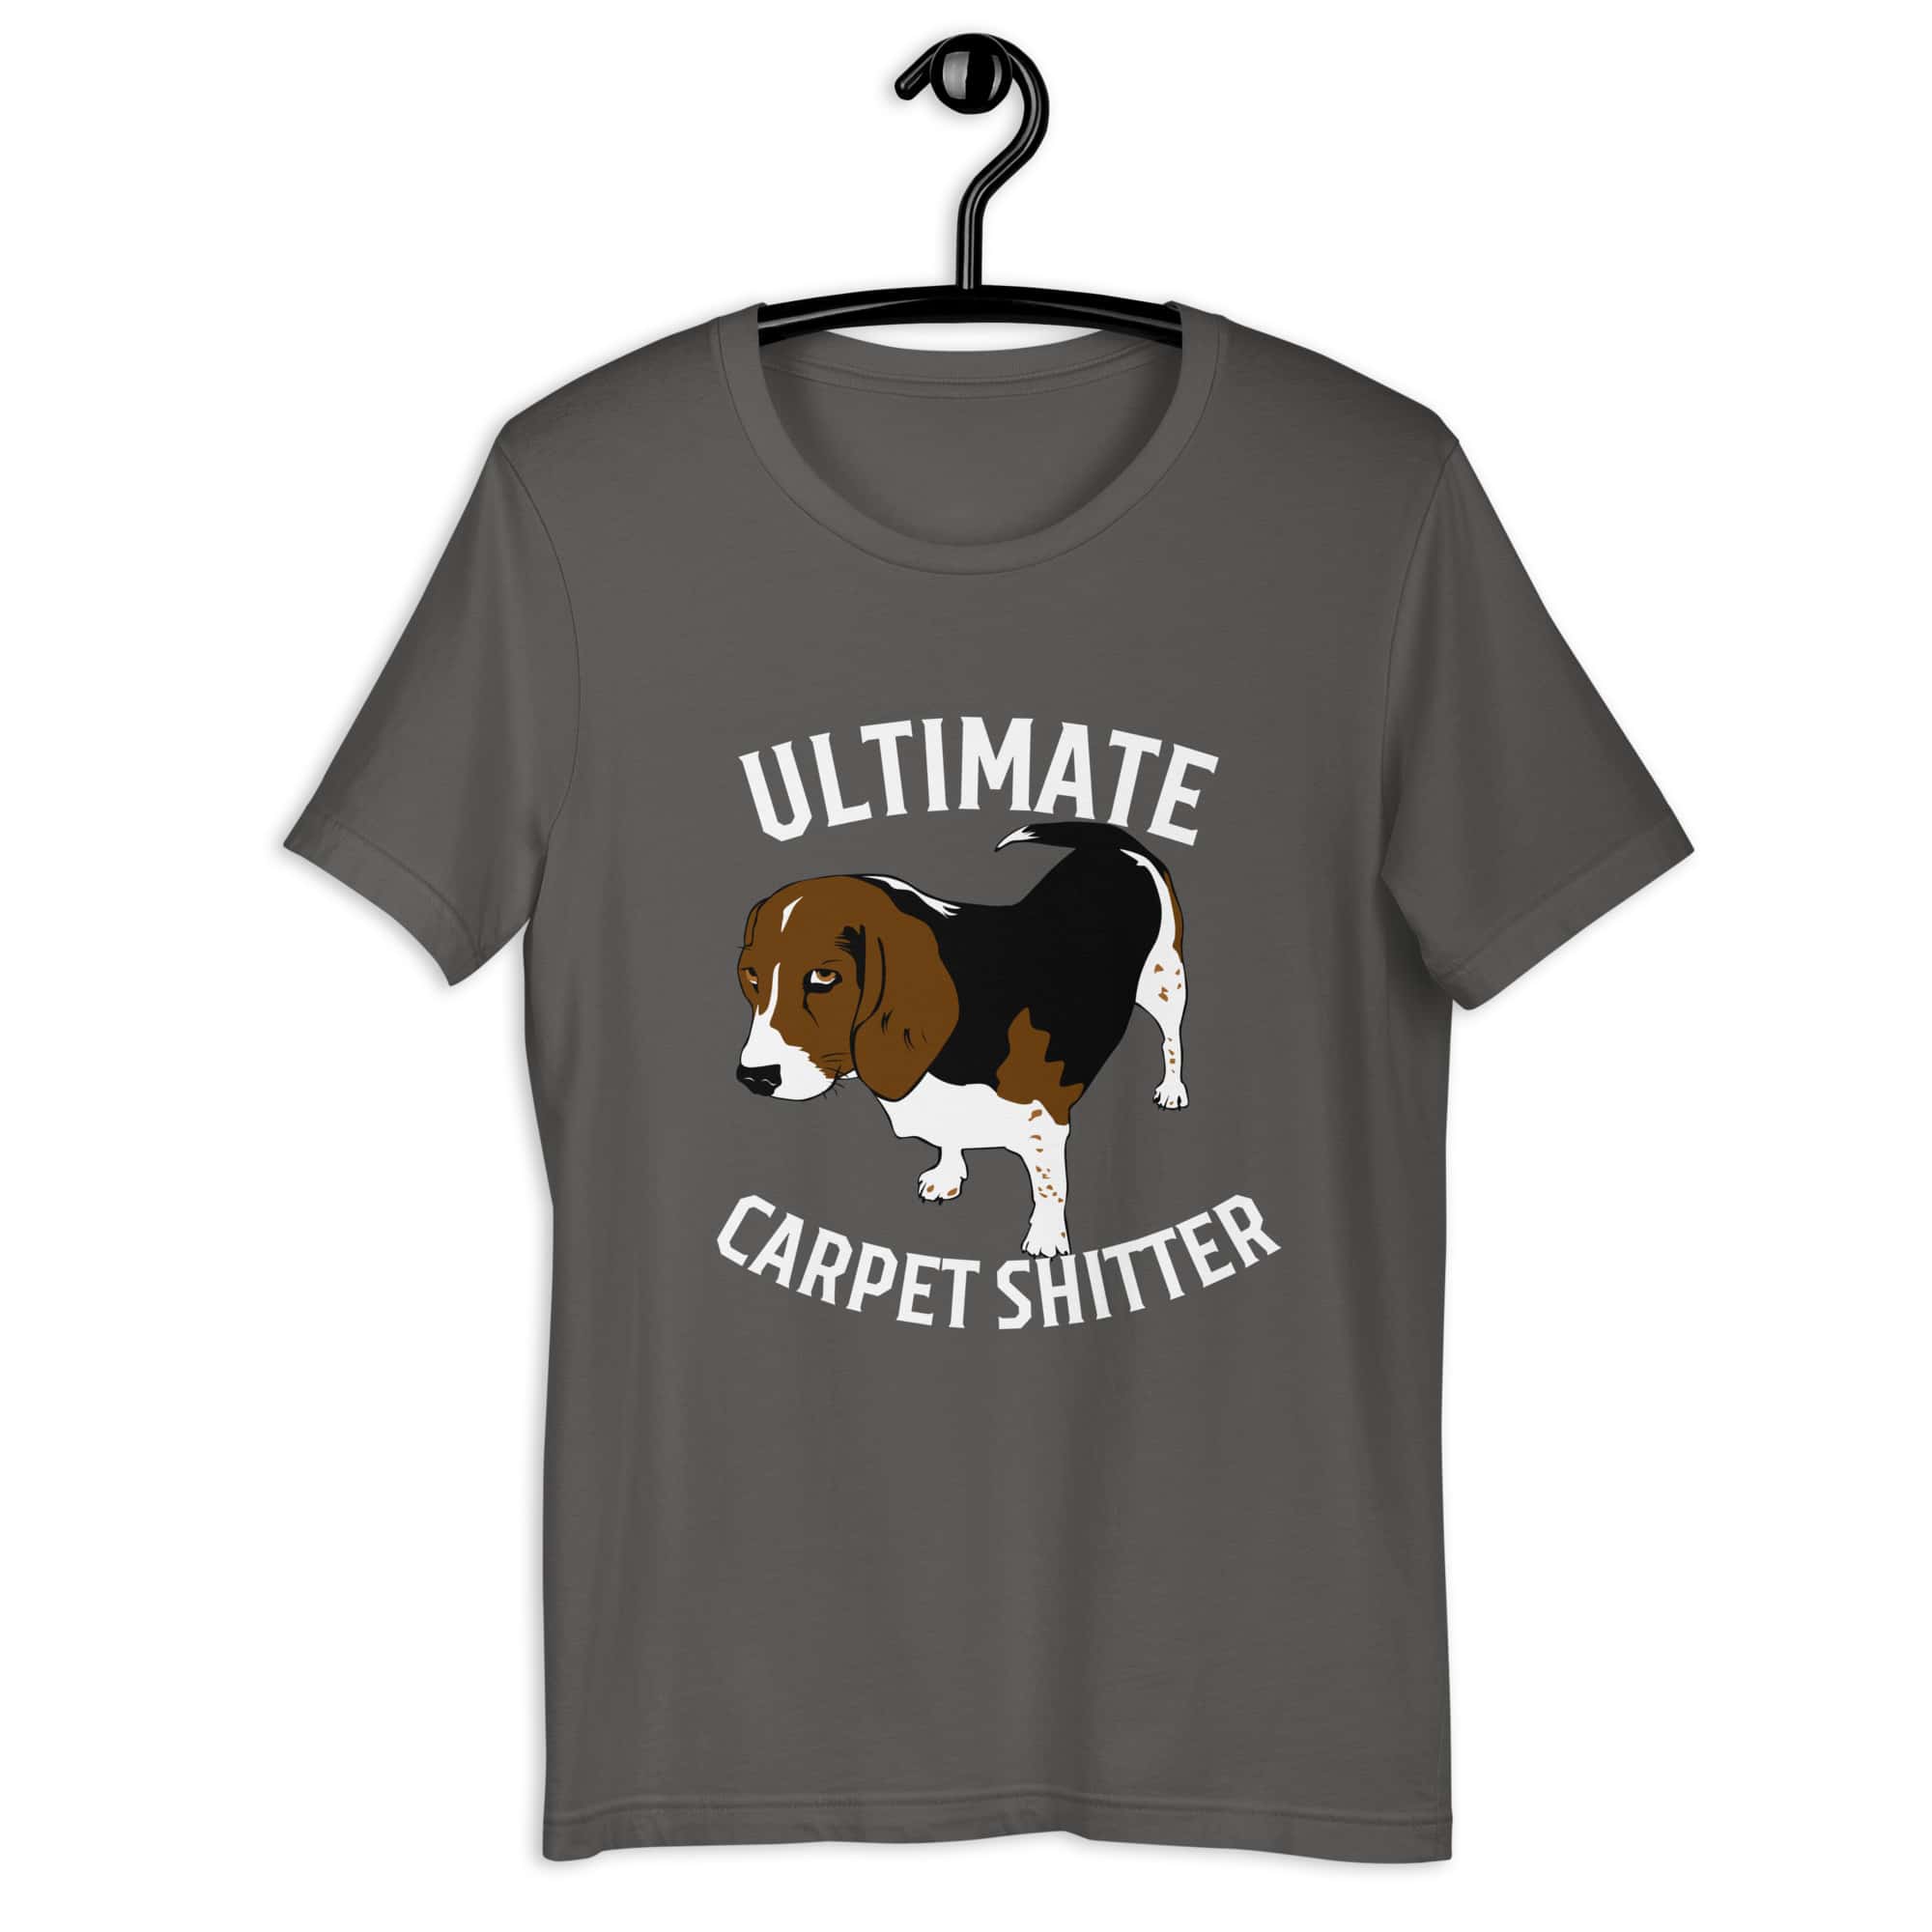 The Ultimate Carpet Shitter Funny Hound Unisex T-Shirt gray